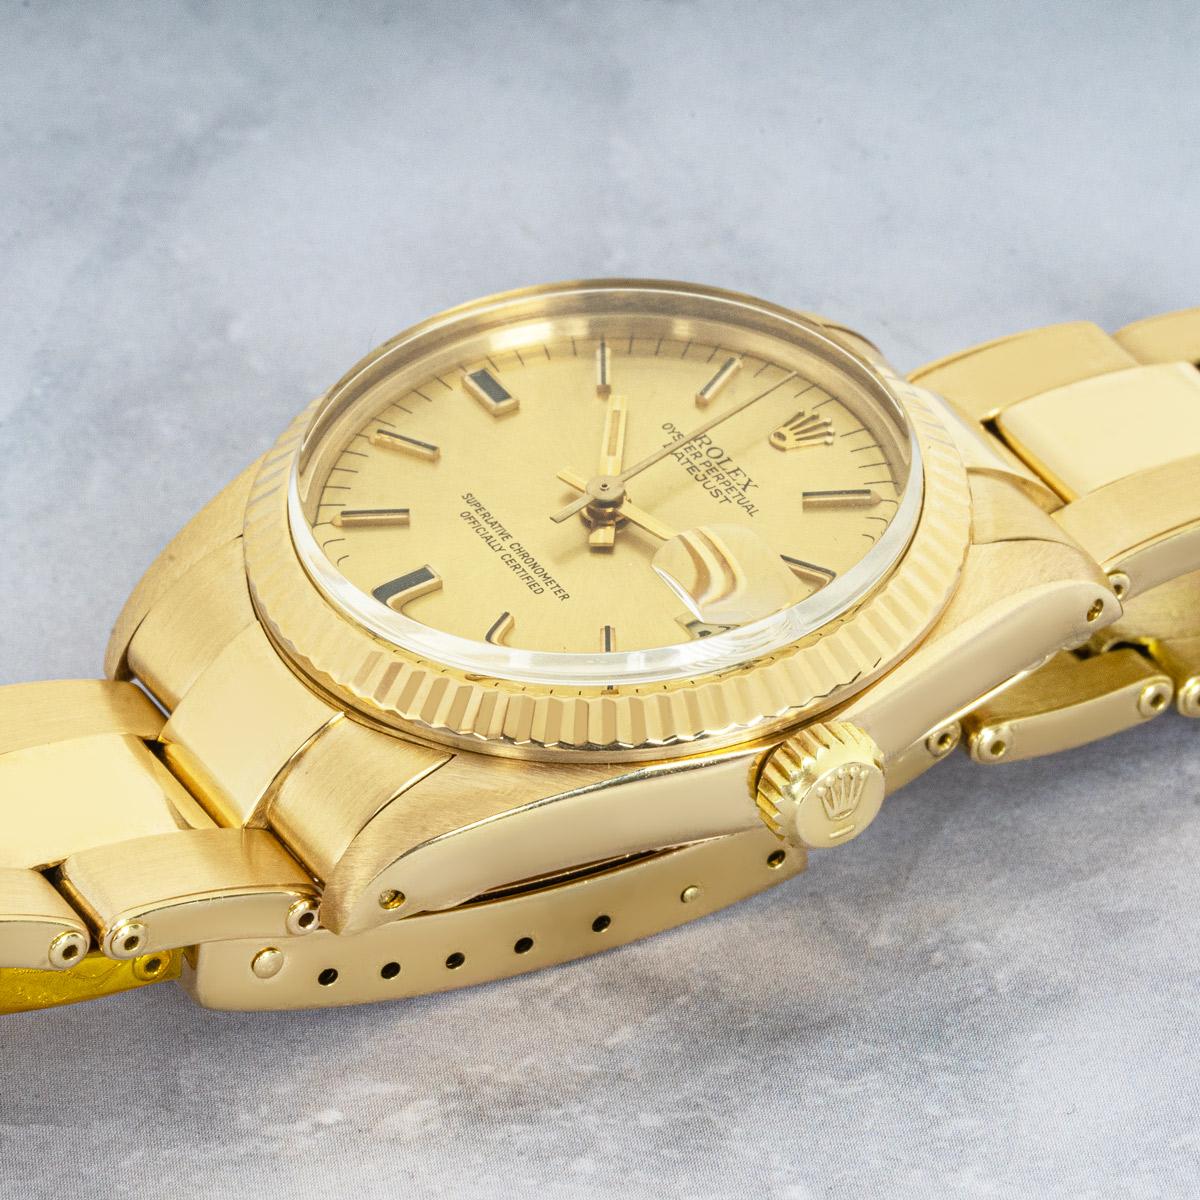 A midsize Rolex Datejust crafted in yellow gold. Featuring a champagne dial with applied hour markers and a distinctive black colouring at 6 and 9 o'clock as well as a fluted yellow gold bezel. The watch is also fitted with a plastic glass,